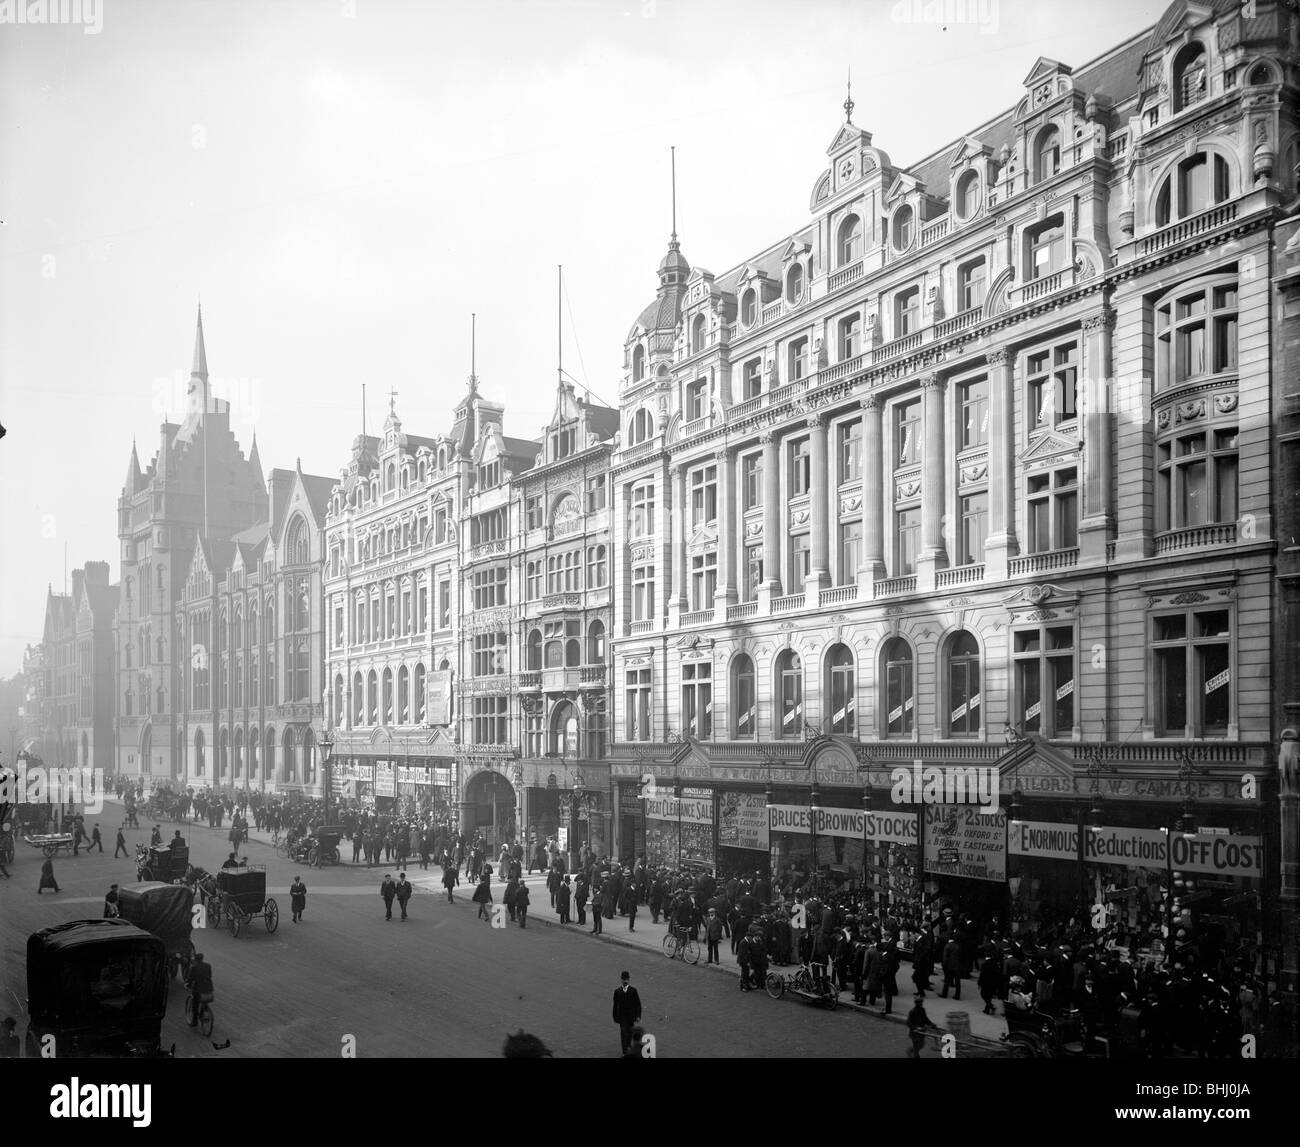 Gamages Department Store and the Prudential Building, Holborn, London, 1907. Artist: Bedford Lemere and Company Stock Photo